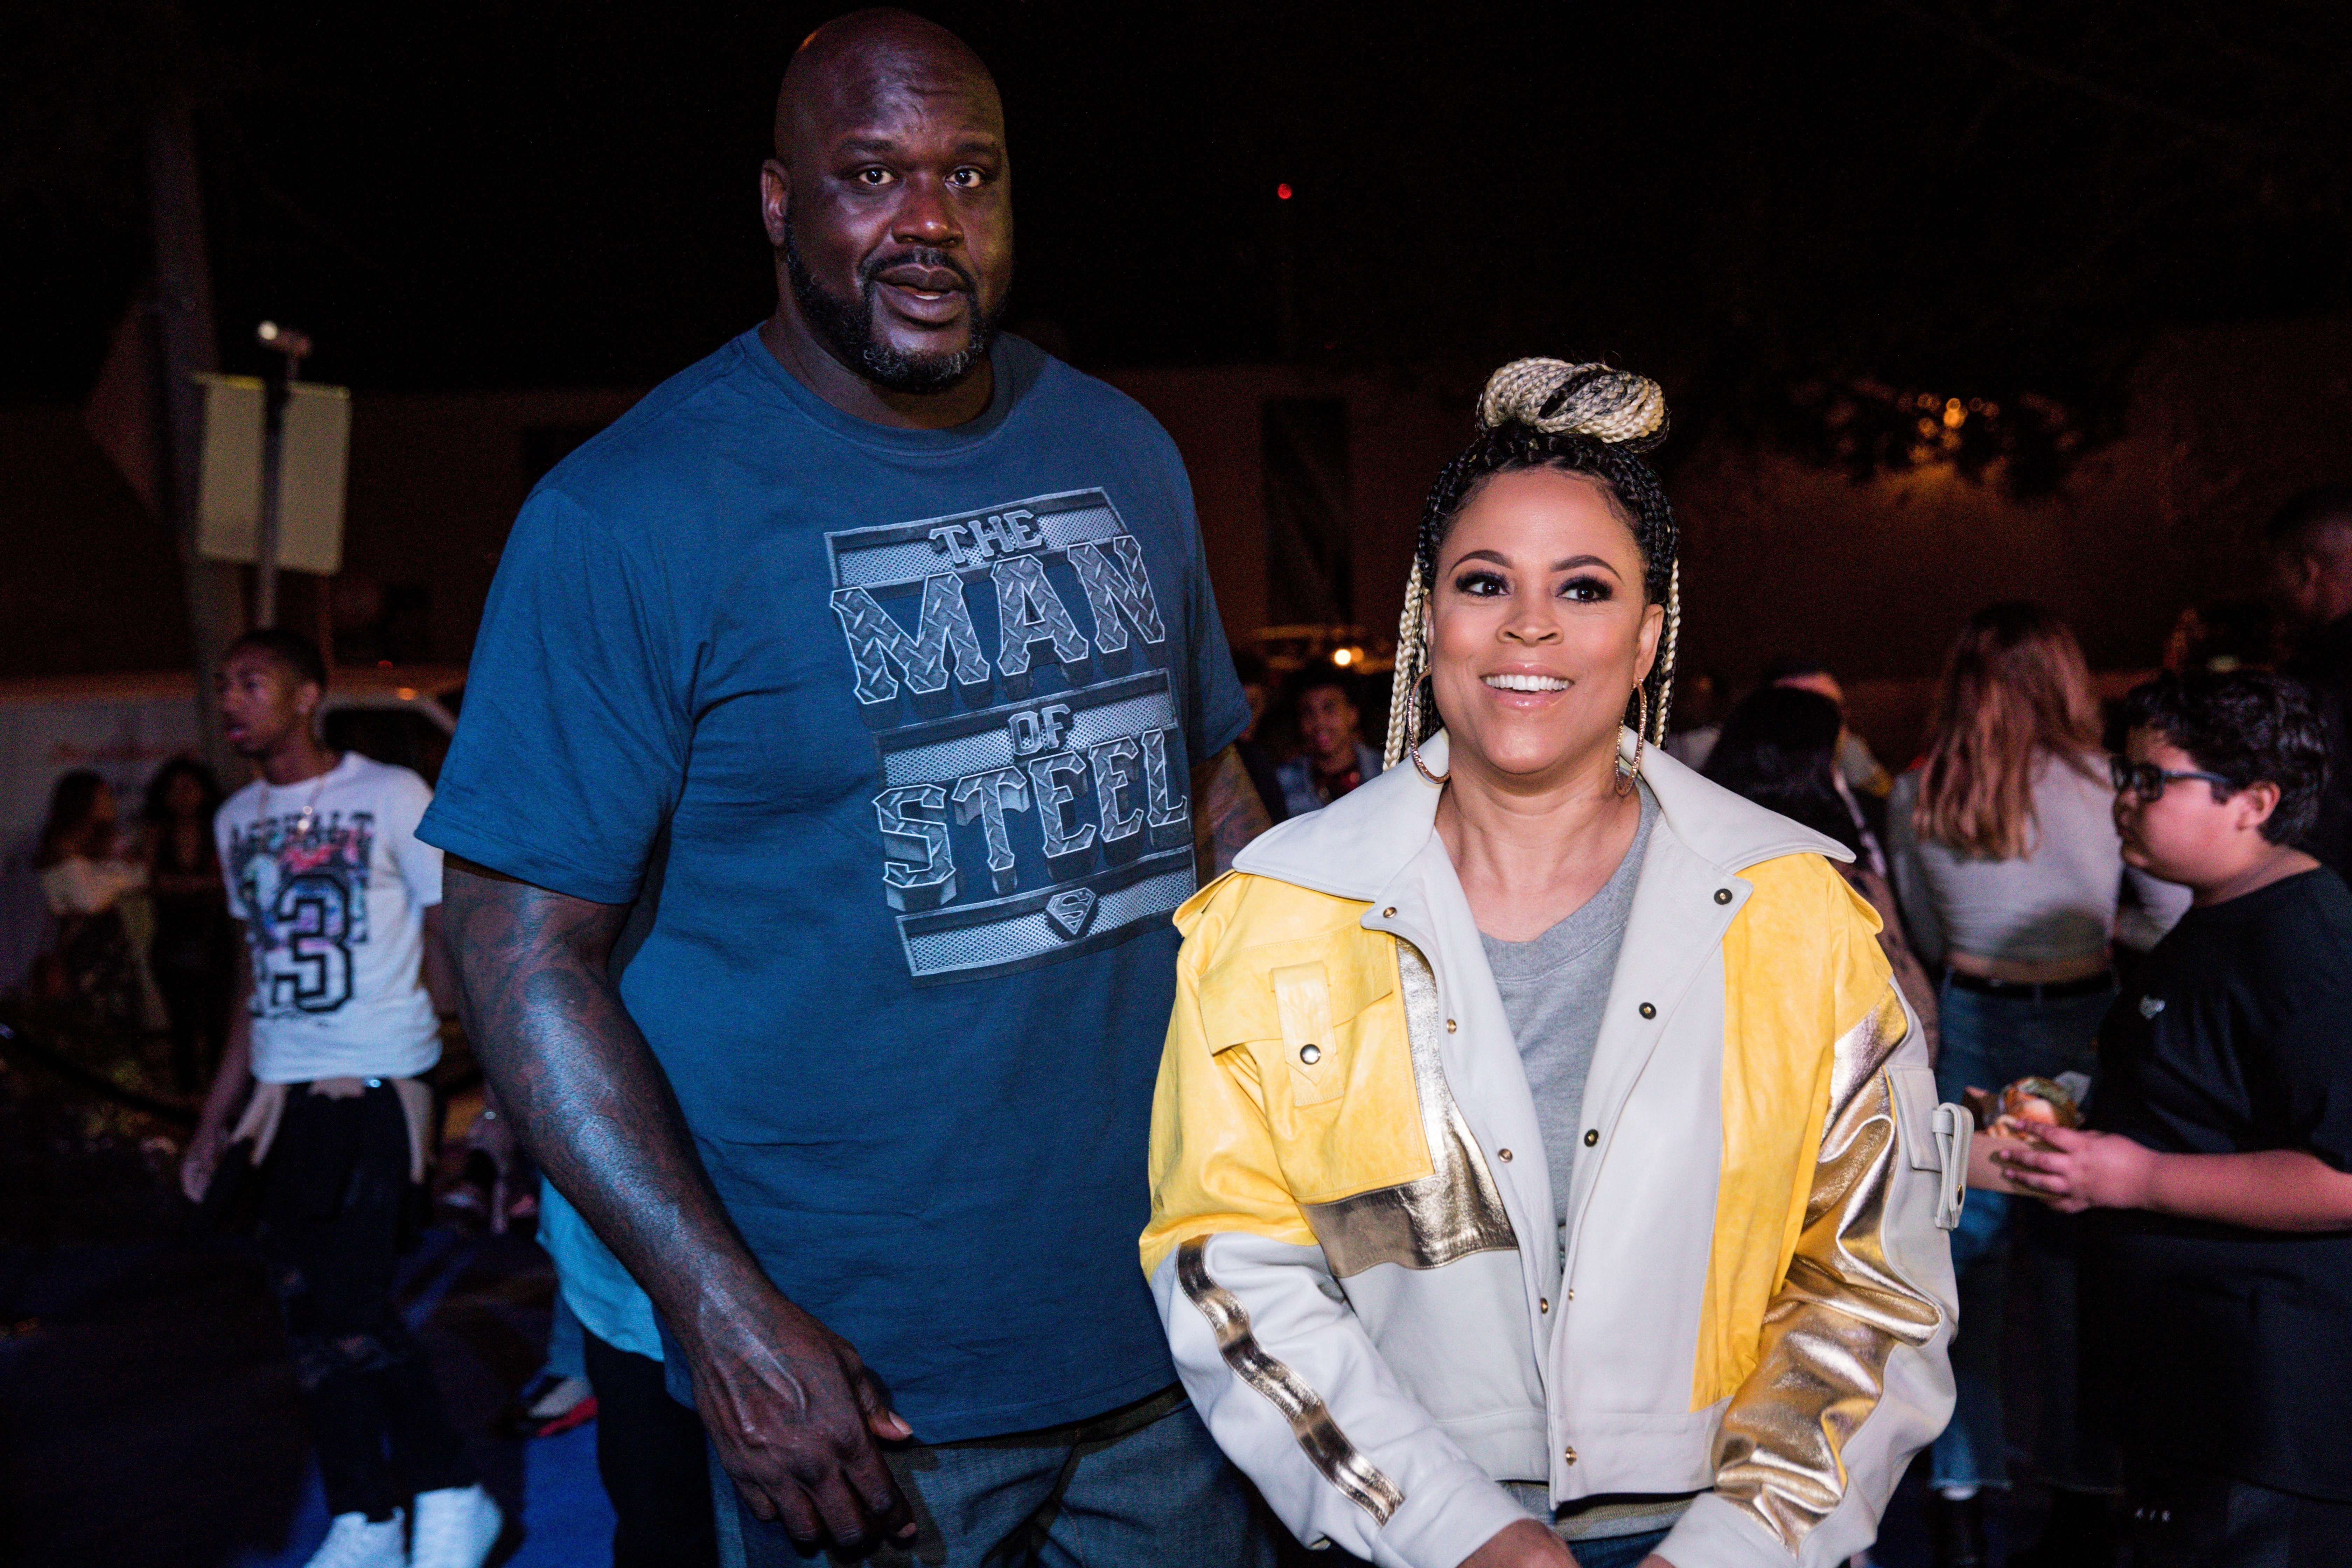 Shaunie O'Neal and Shaquille O'Neal celebrate Shareef O'Neal's 18th birthday party at West Coast Customs on January 13, 2018 | Photo: GettyImages